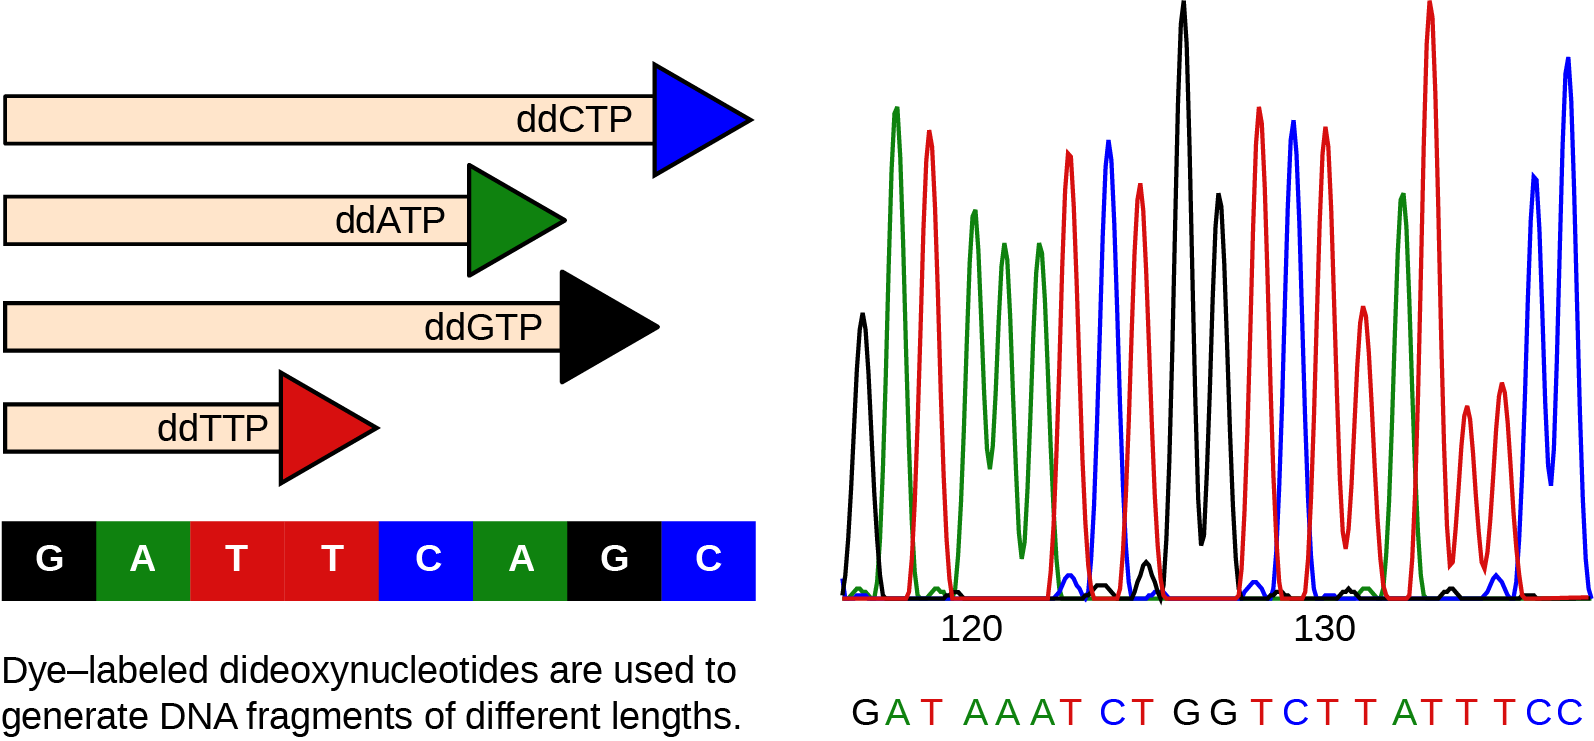 The left part of this illustration shows a parent strand of DNA with the sequence GATTCAGC, and four daughter strands, each of which was made in the presence of a different dideoxynucleotide: ddATP, ddCTP, ddGTP, or ddTTP. The growing chain terminates when a ddNTP is incorporated, resulting in daughter strands of different lengths. The right part of this image shows the separation of the DNA fragments on the basis of size. Each ddNTP is fluorescently labeled with a different color so that the sequence can be read by the size of each fragment and its color.